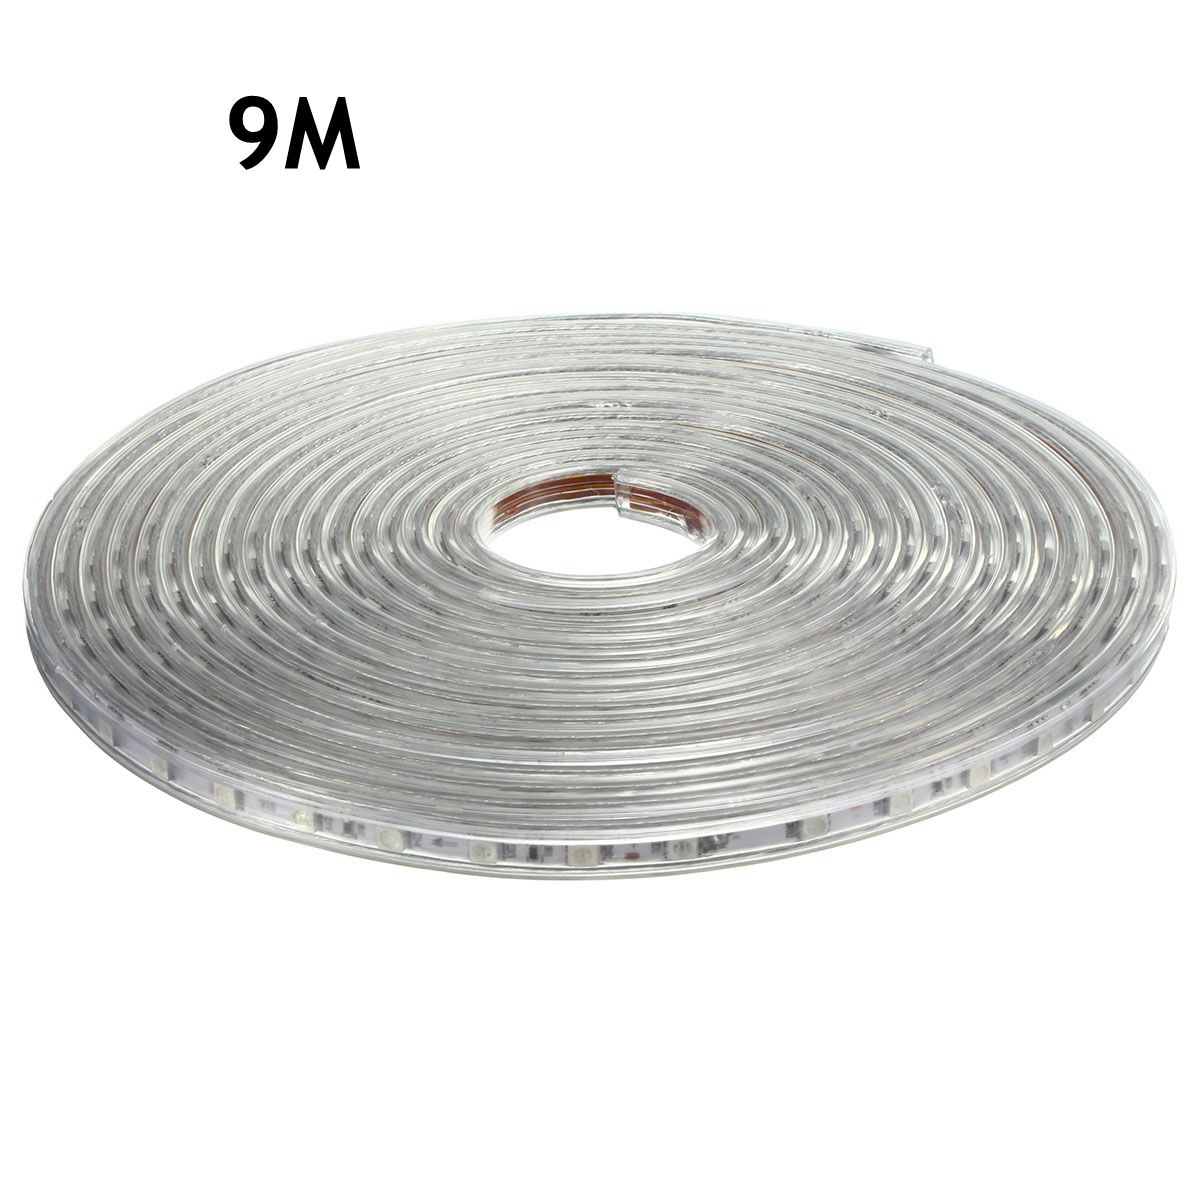 220V-9M-5050-LED-SMD-Outdoor-Waterproof-Flexible-Tape-Rope-Strip-Light-Xmas-1066358